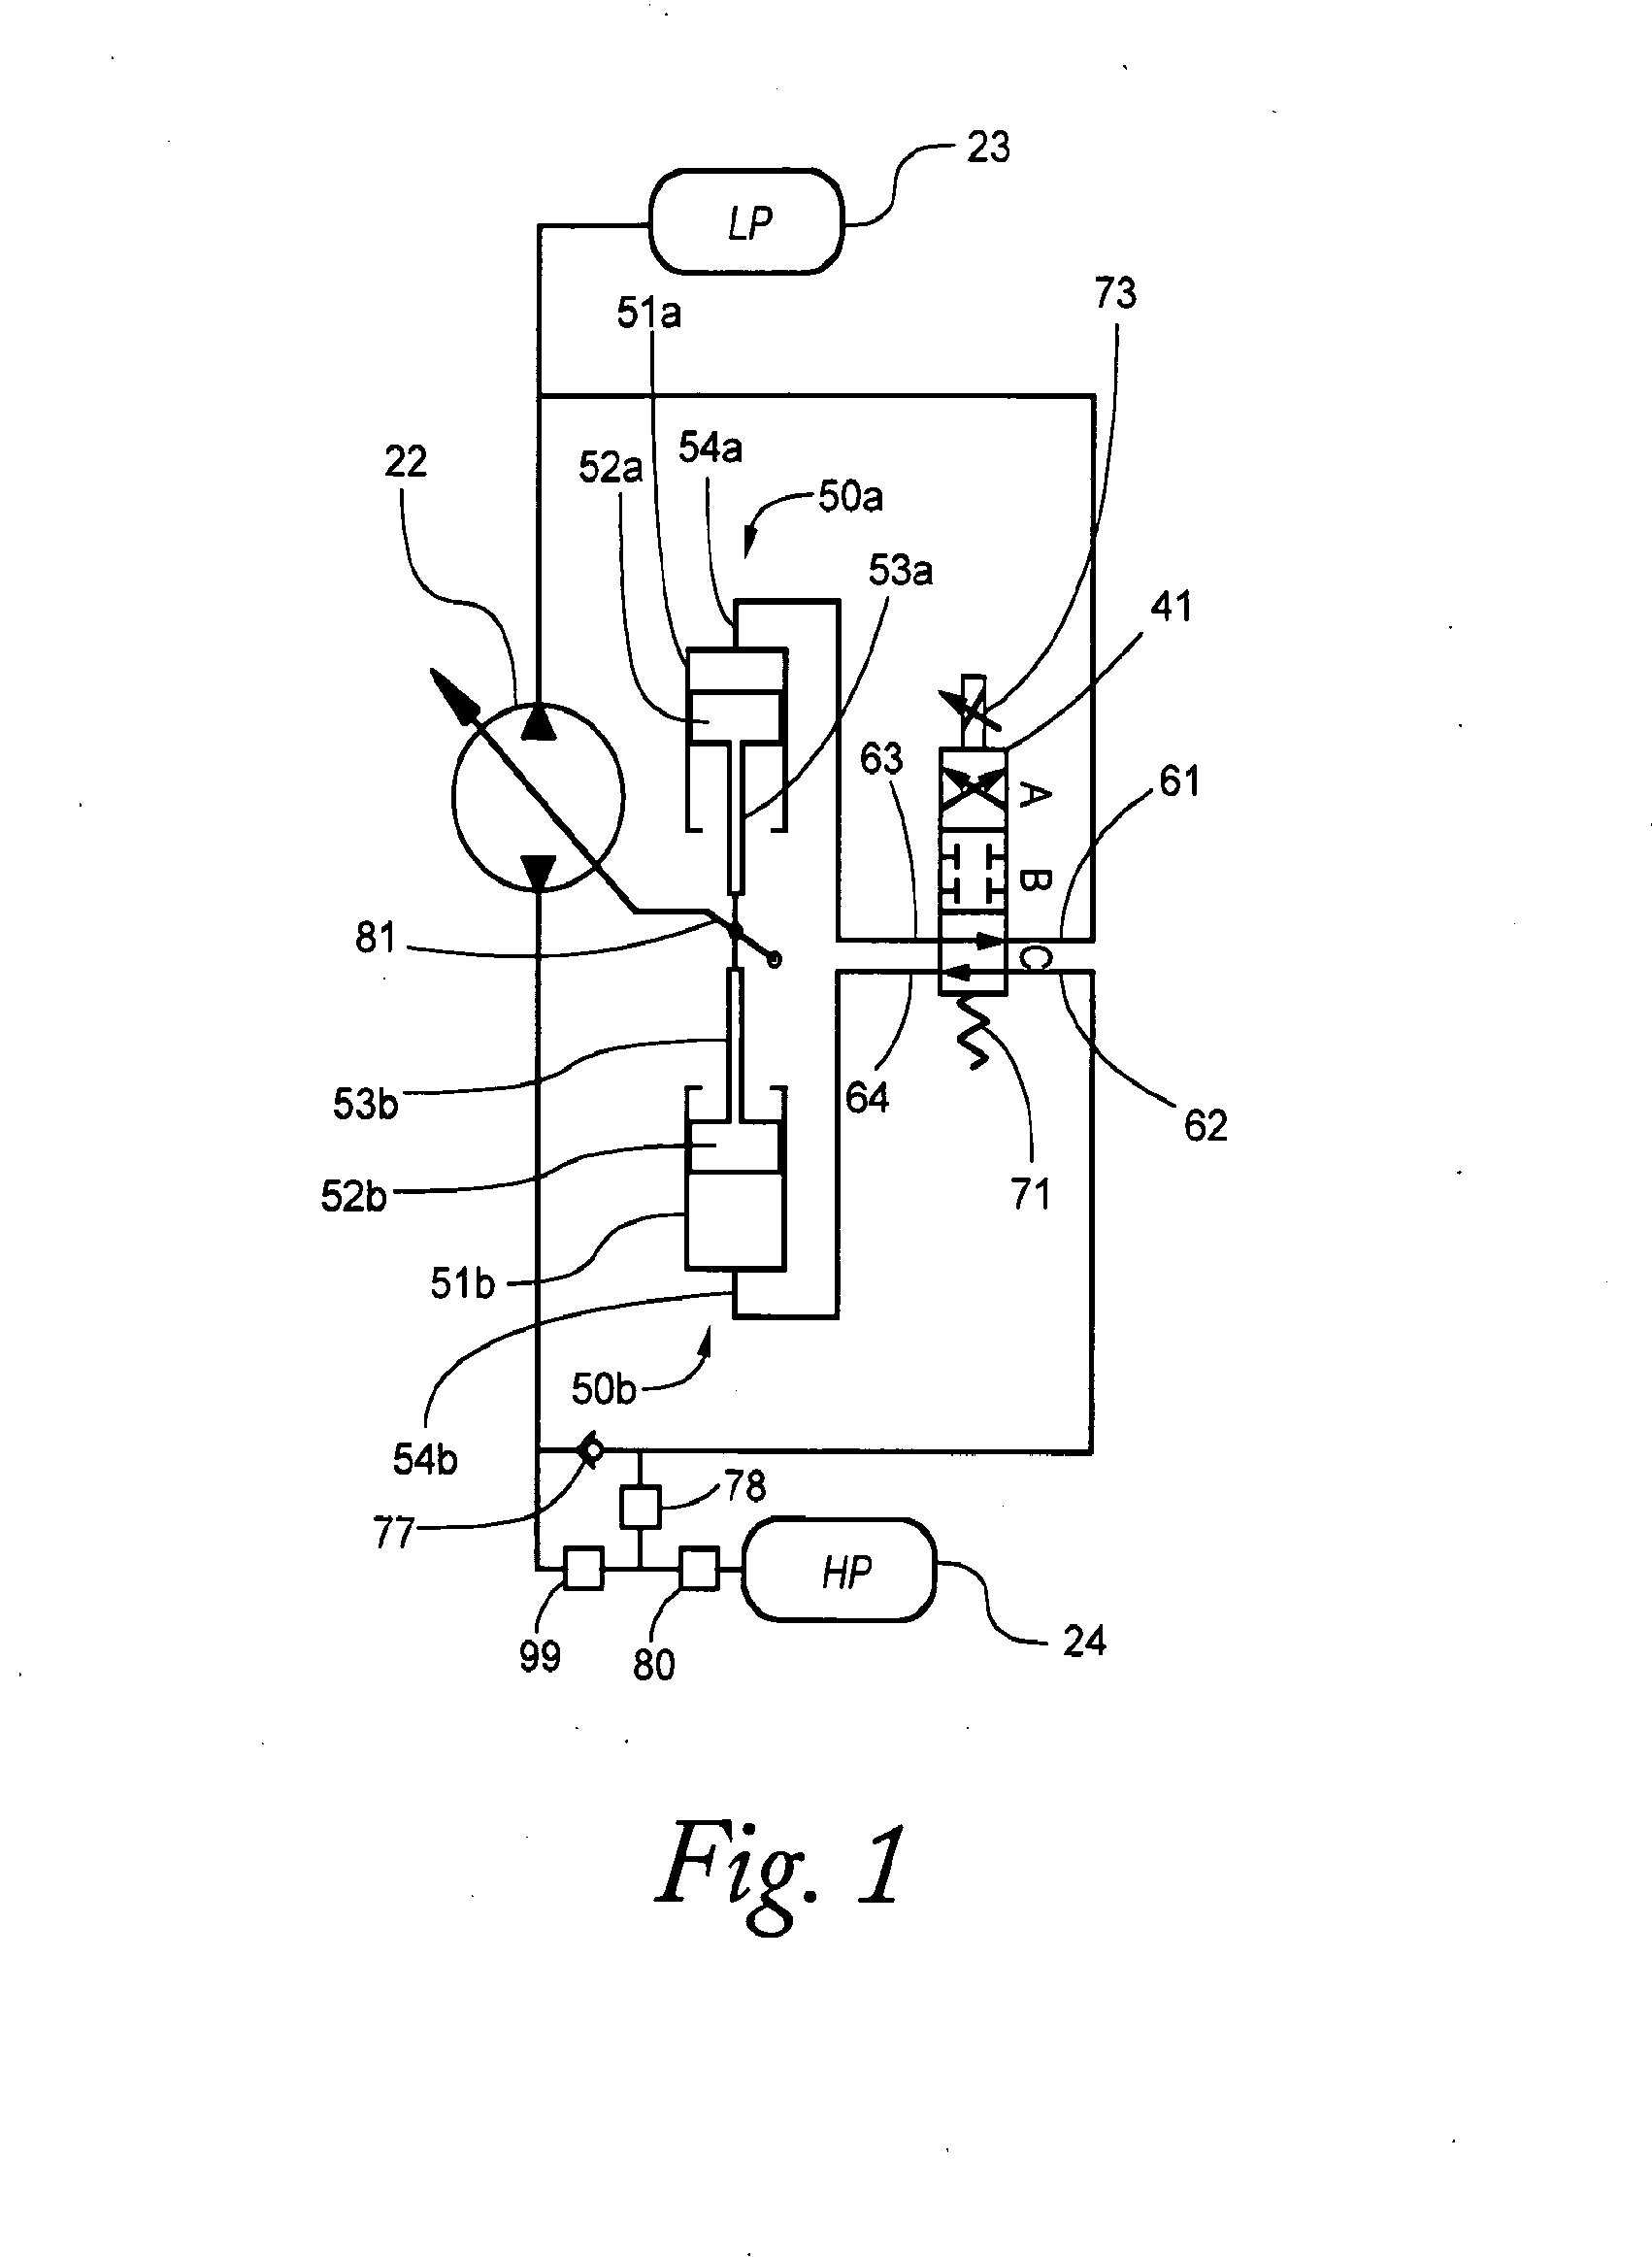 Methods for Safe Operation of Hydraulic Hybrid Vehicles with Over-Center Pump/Motors